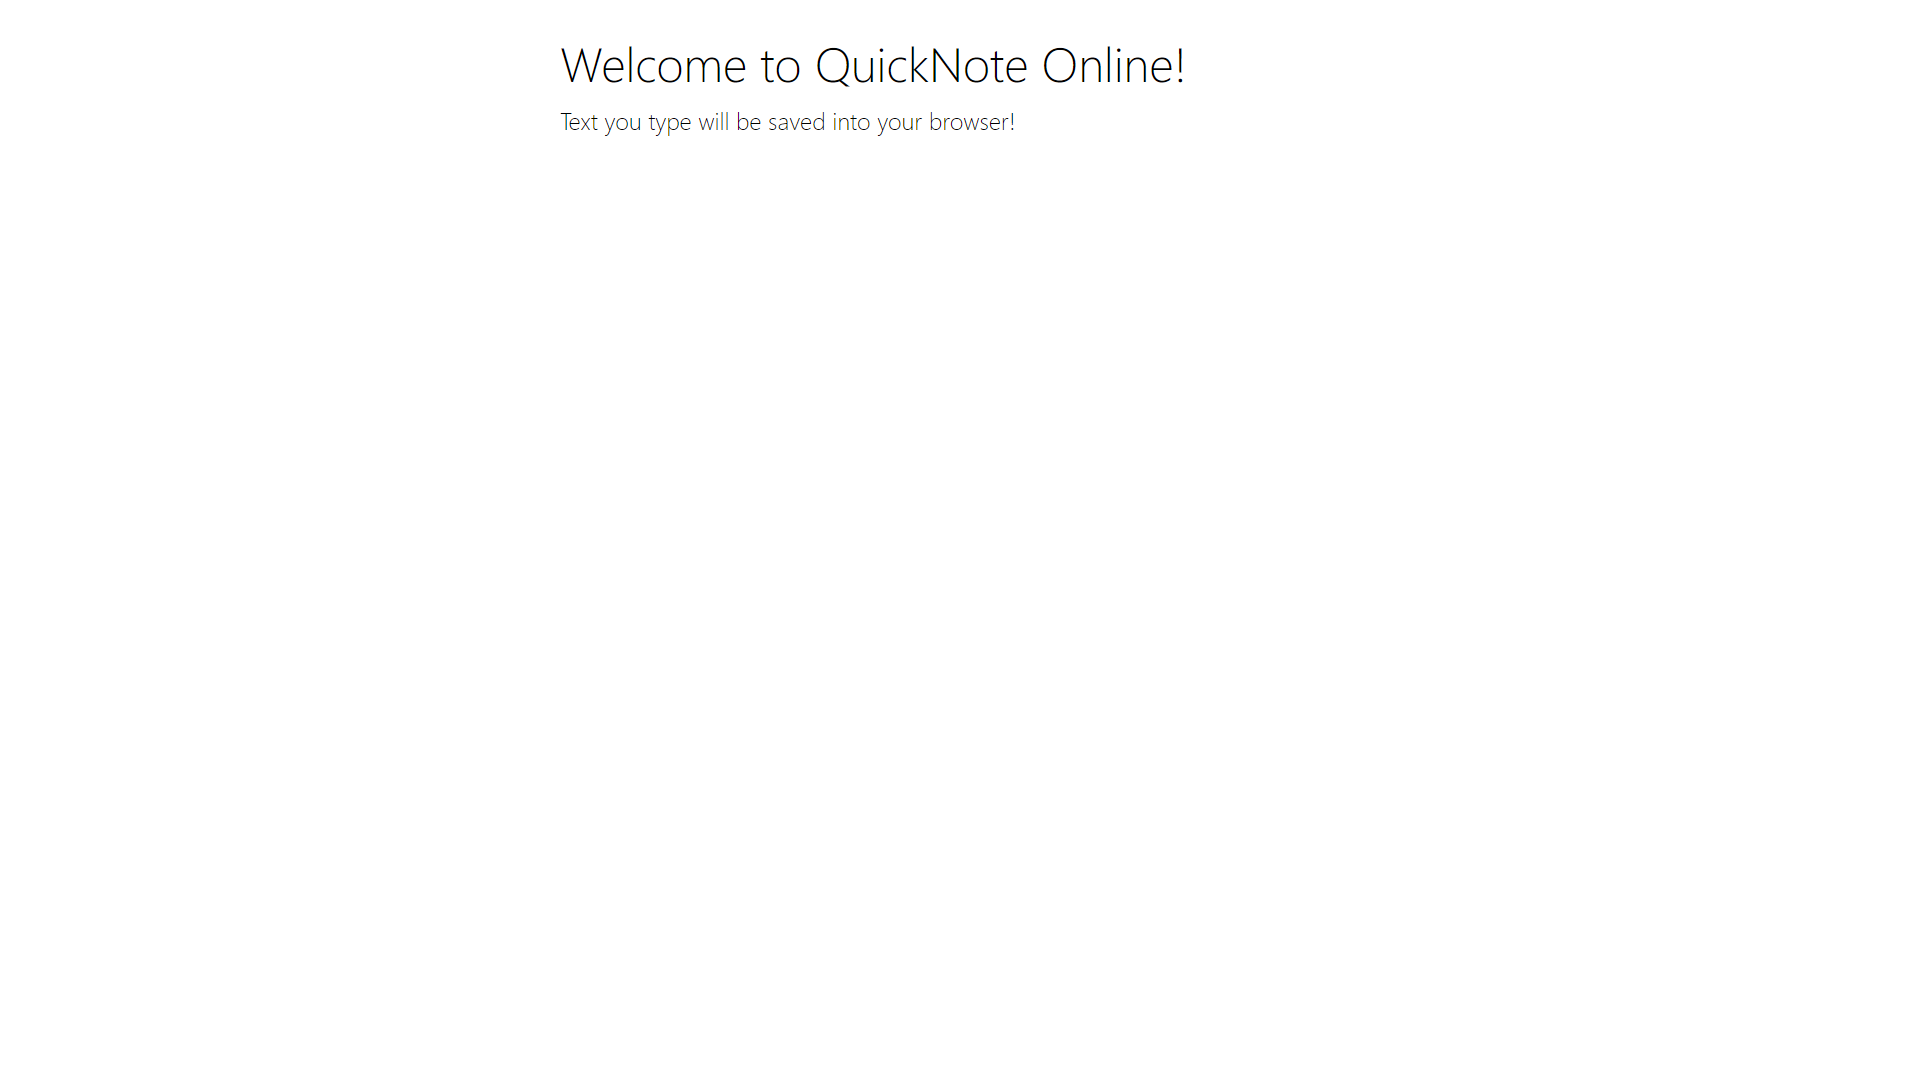 Welcome to QuickNote Online